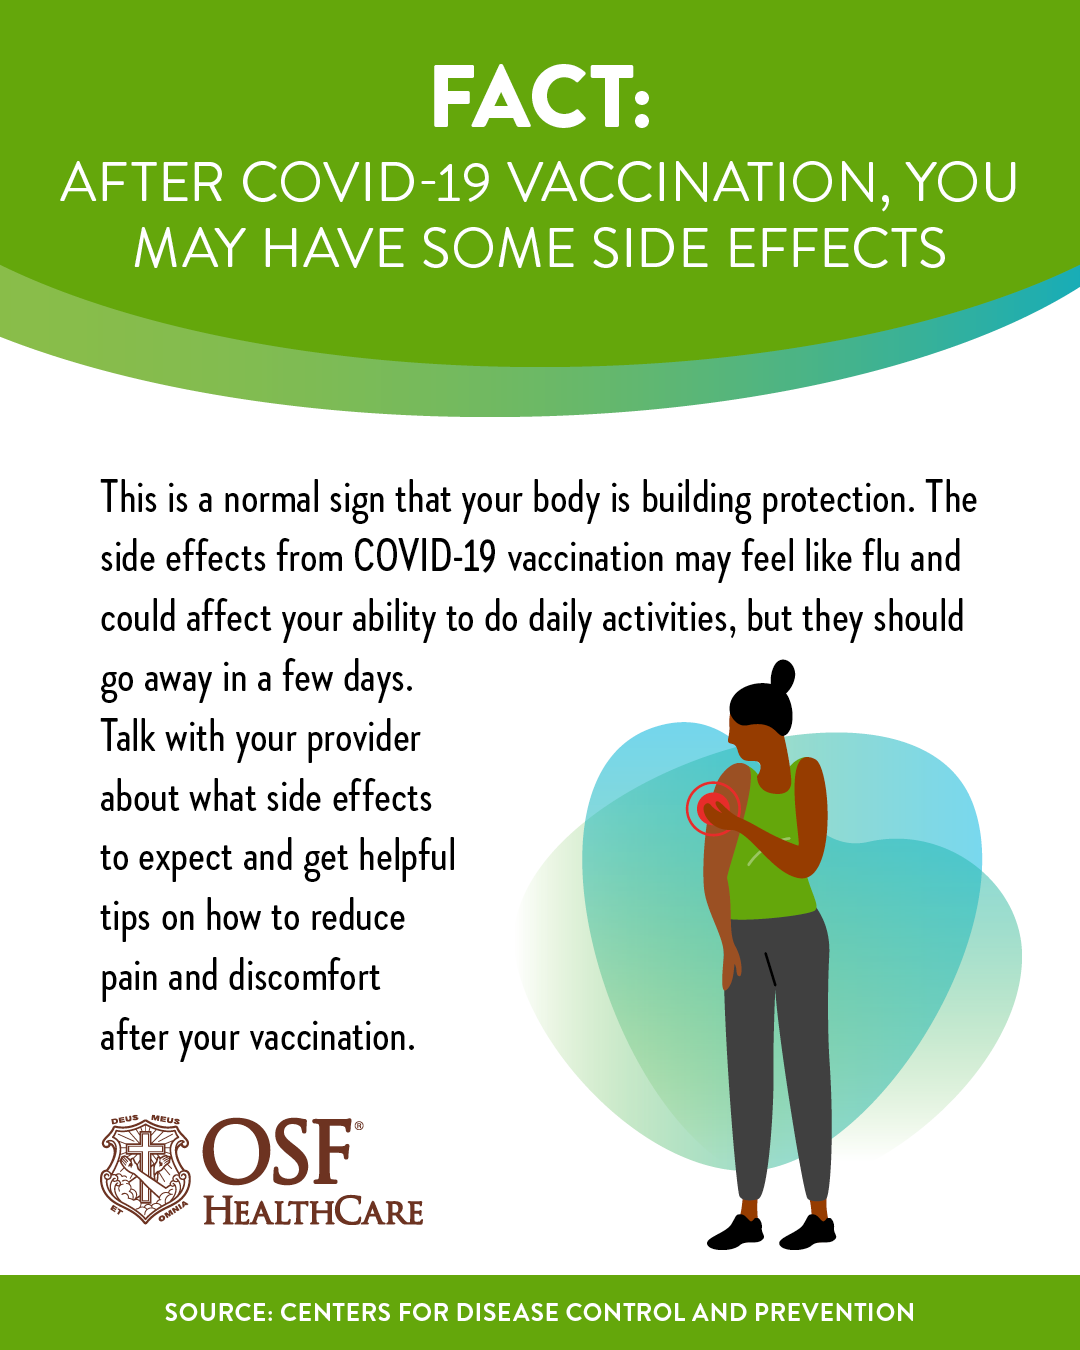 Exercise after vaccination